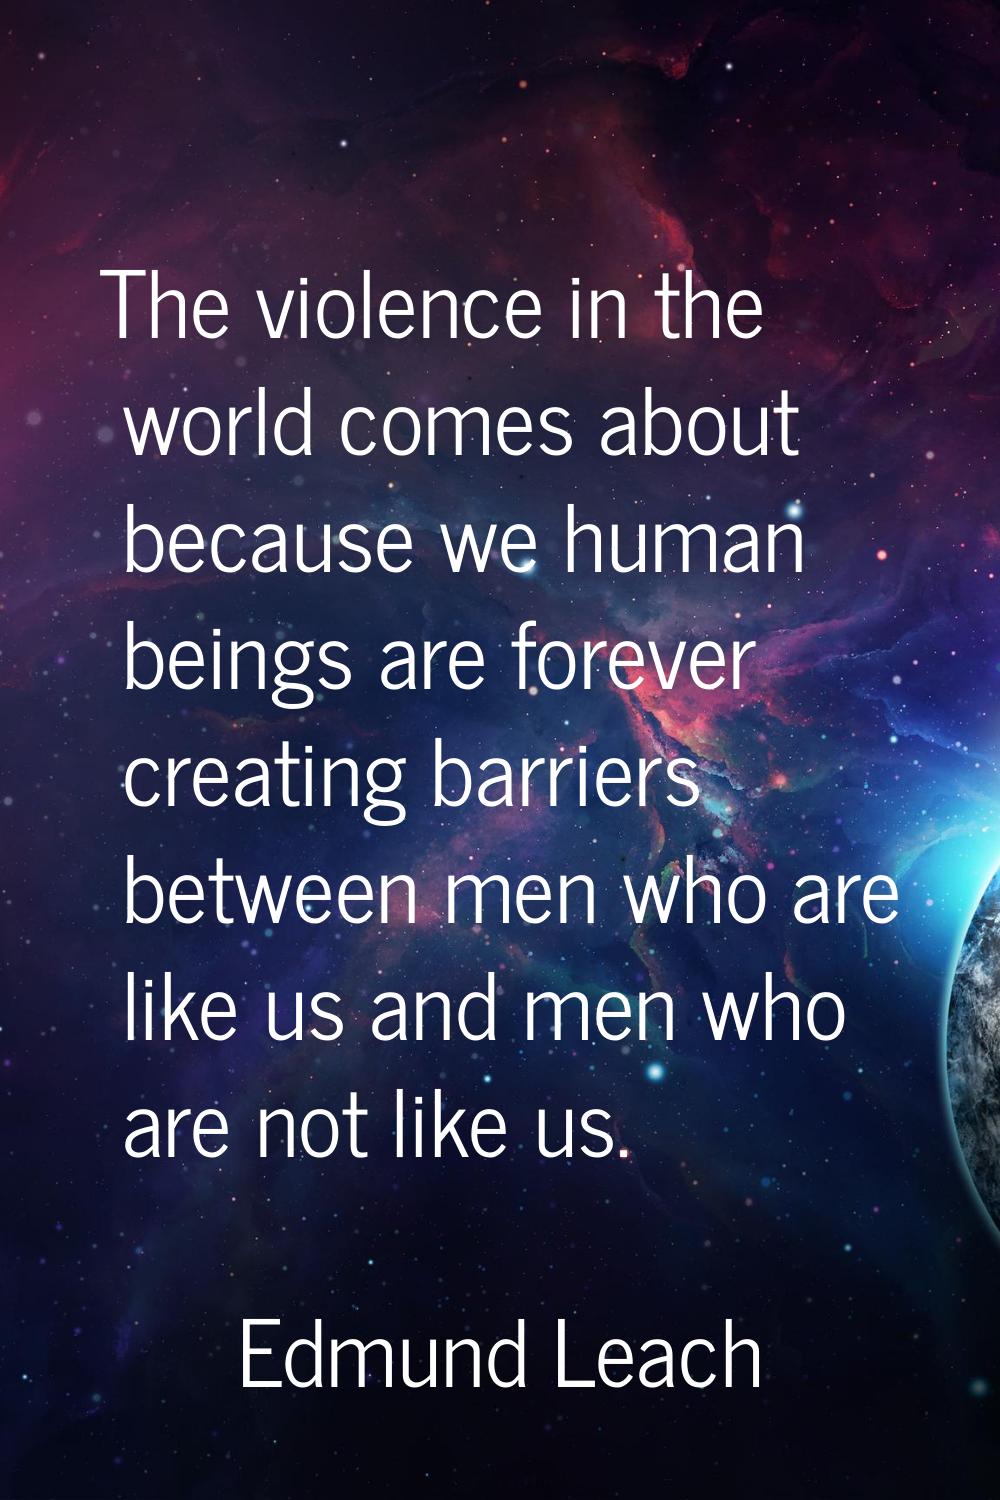 The violence in the world comes about because we human beings are forever creating barriers between